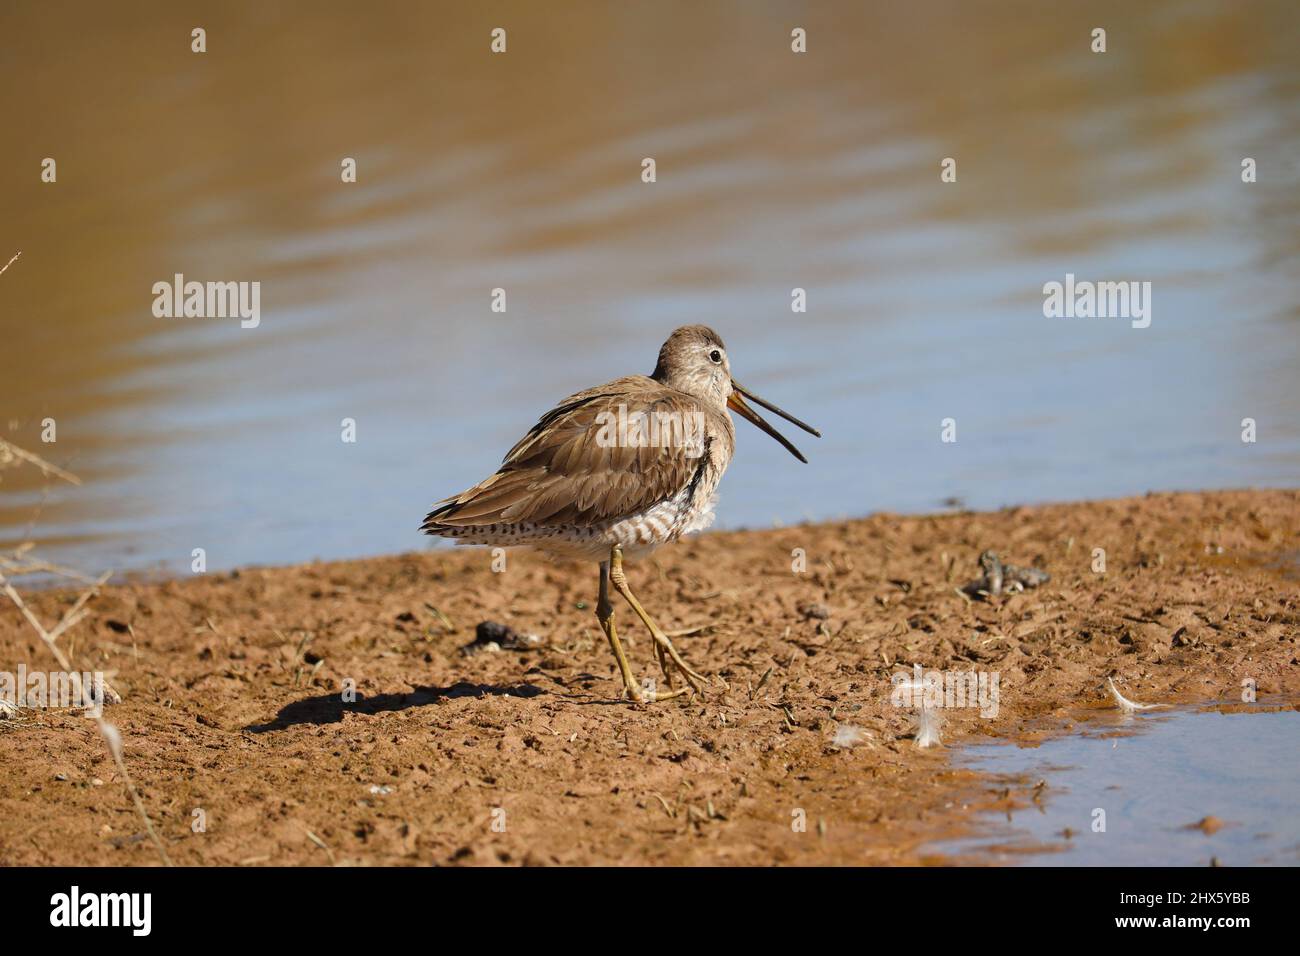 Long-billed dowitcher or Limnodromus scolopaceus standing on bank of a pond at the Riparian water ranch in Arizona. Stock Photo